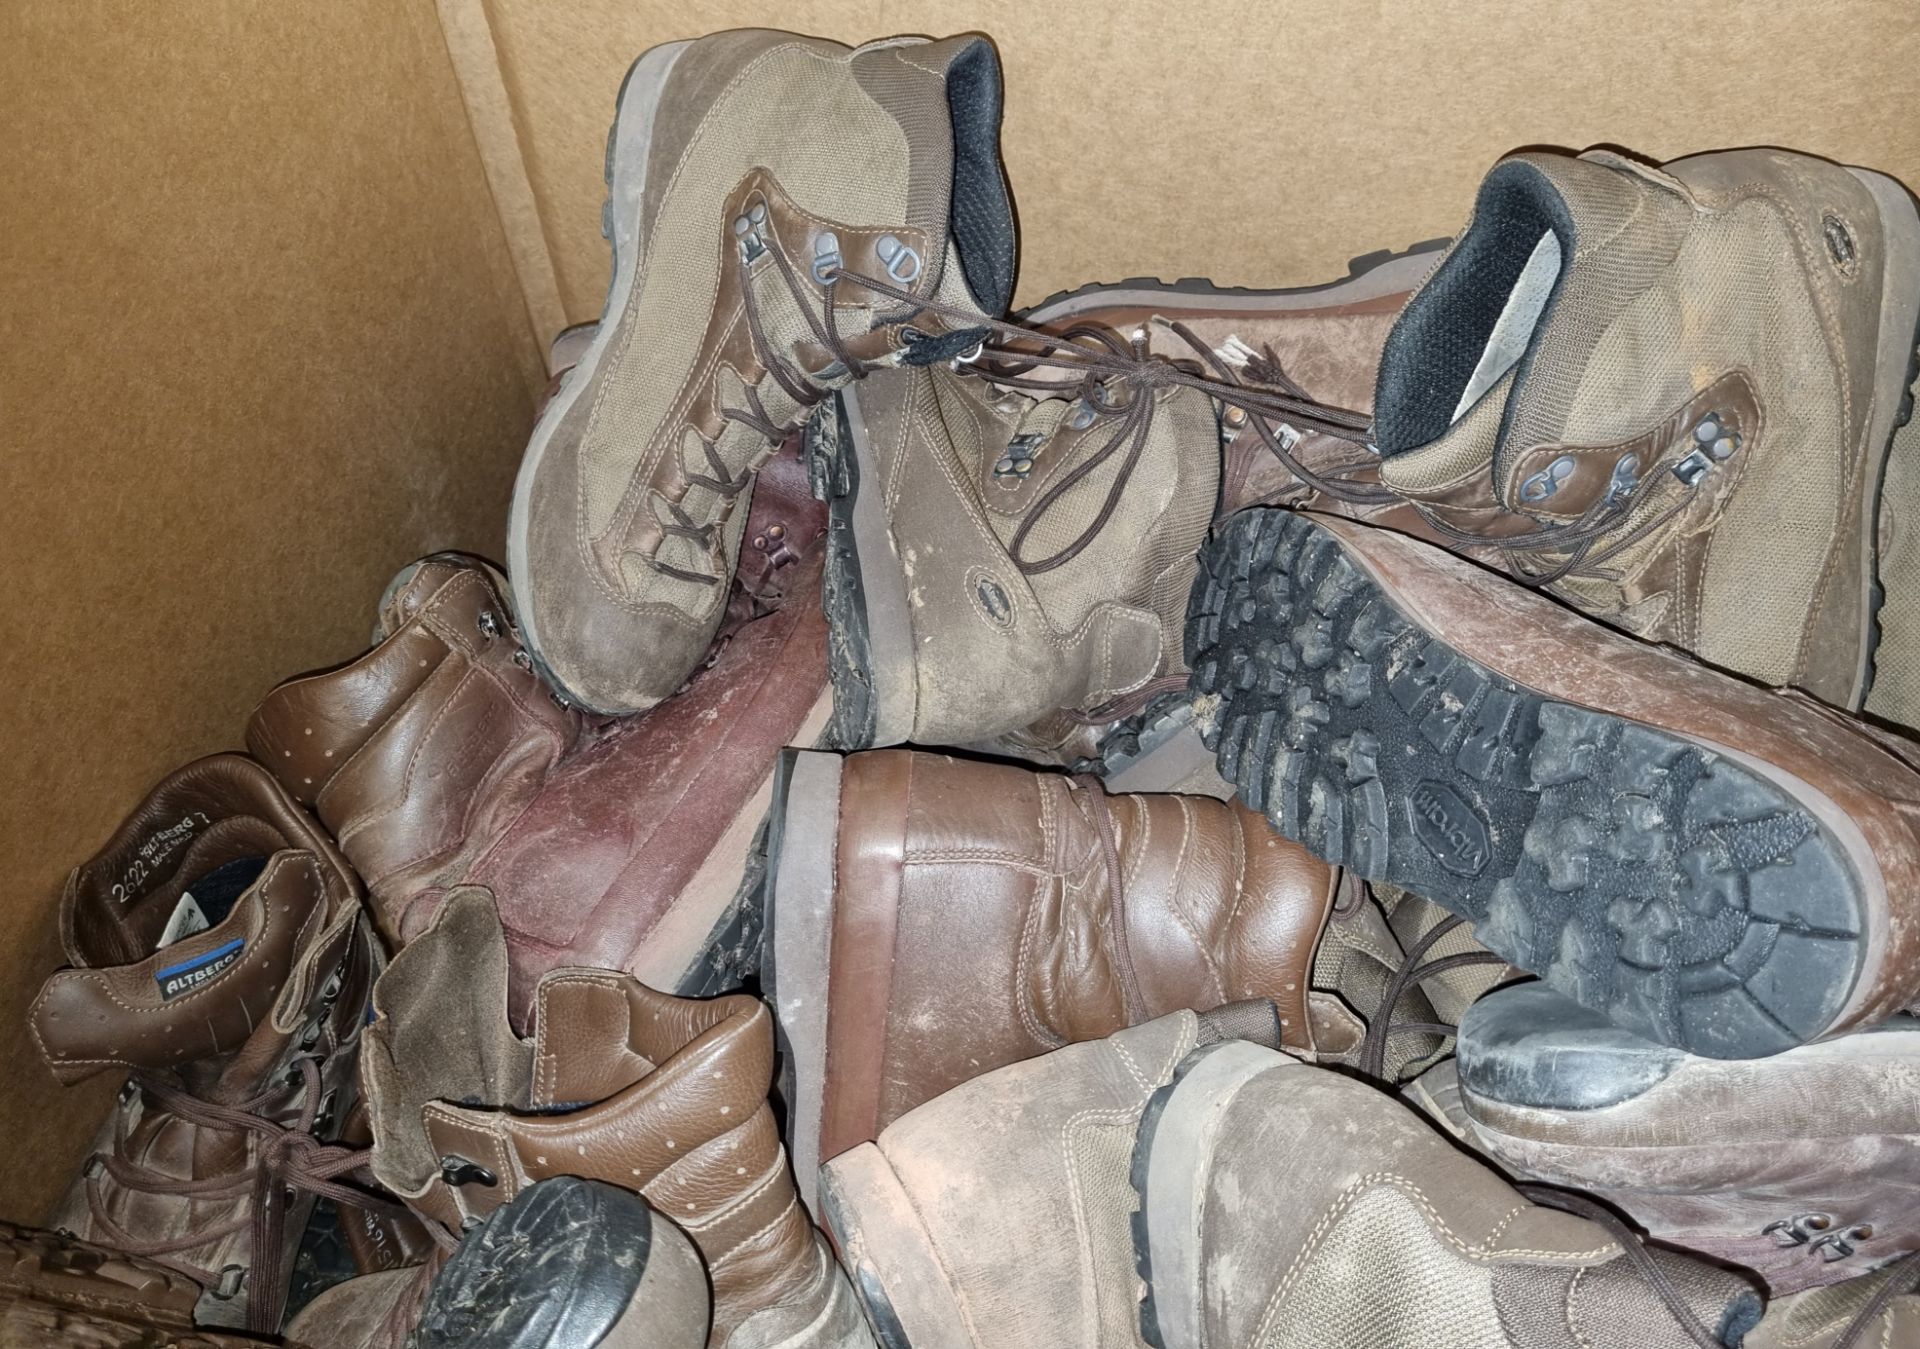 50x pairs of Various Boots including Magnum, Iturri & YDS - mixed grades and sizes - Image 2 of 5